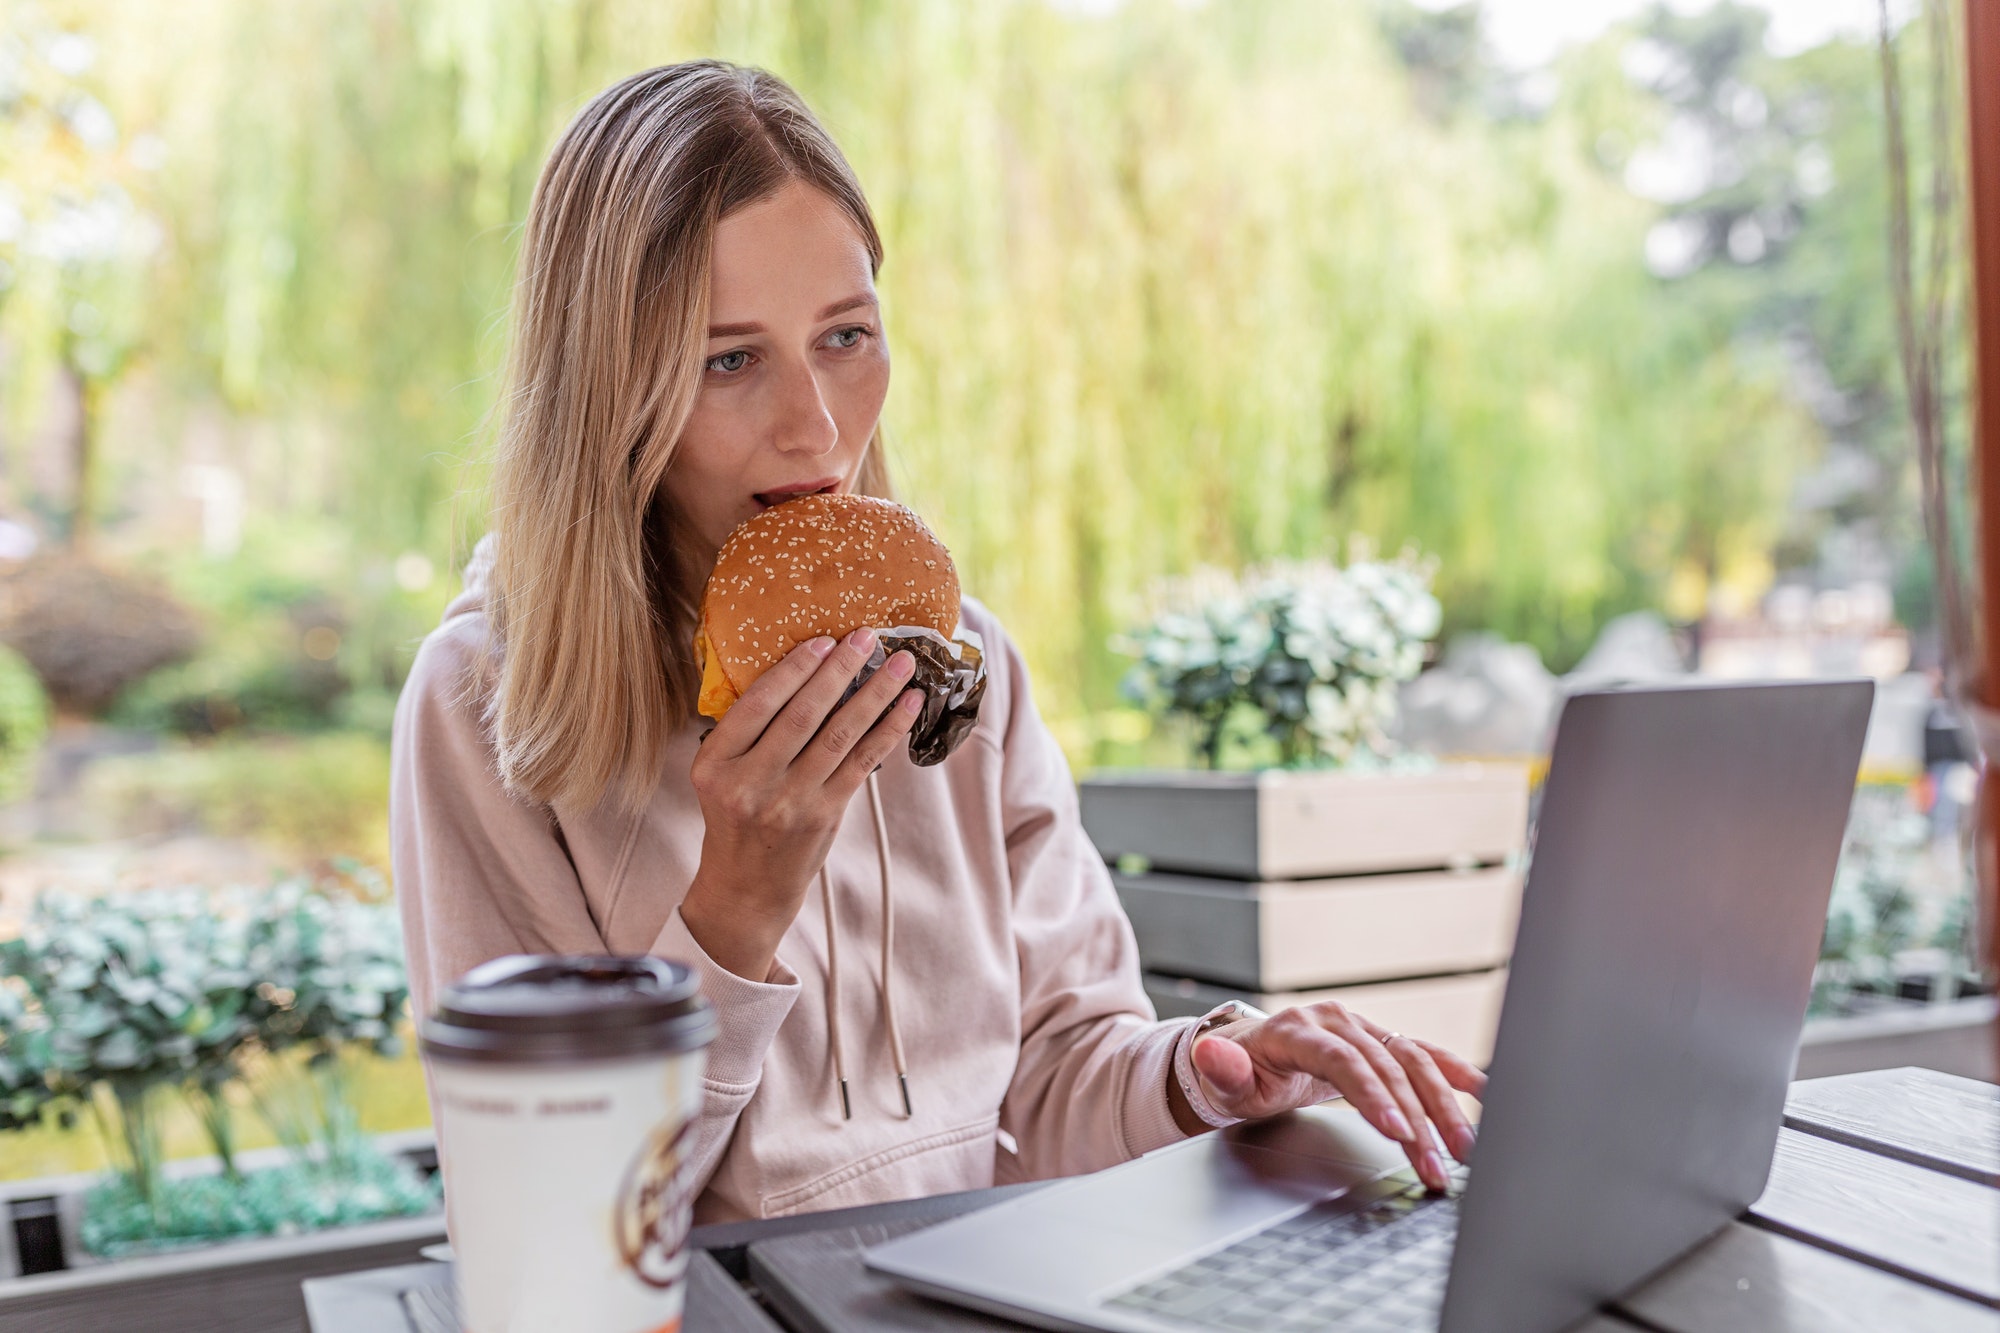 millennial business woman eating cheeseburger outdoor college life student using laptop technology